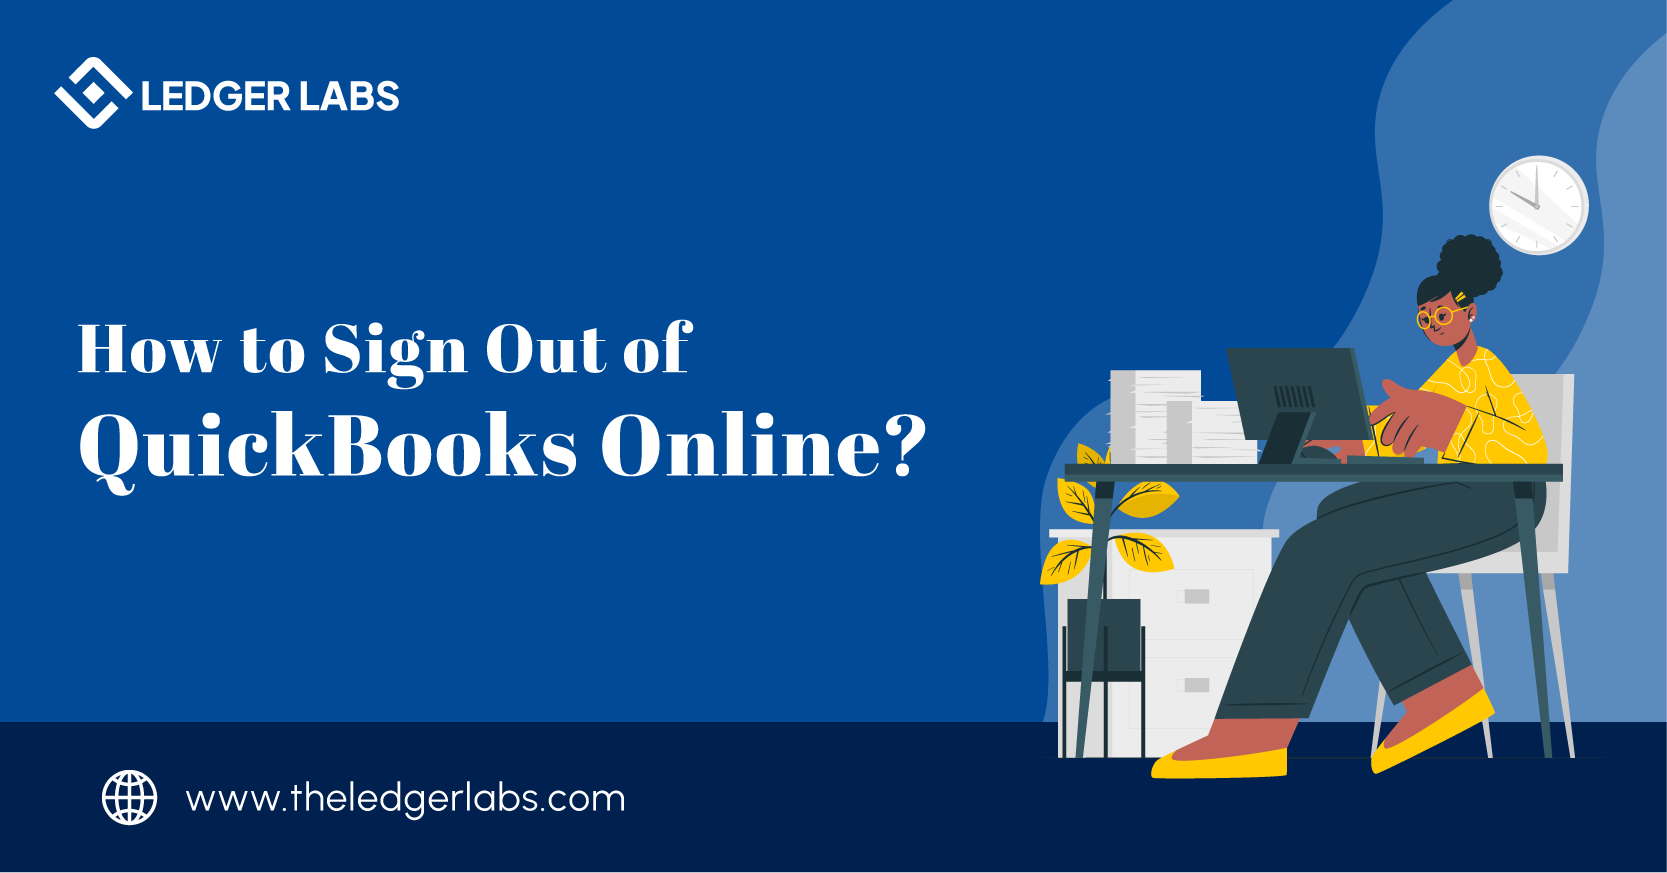 How to log out of quickbooks online